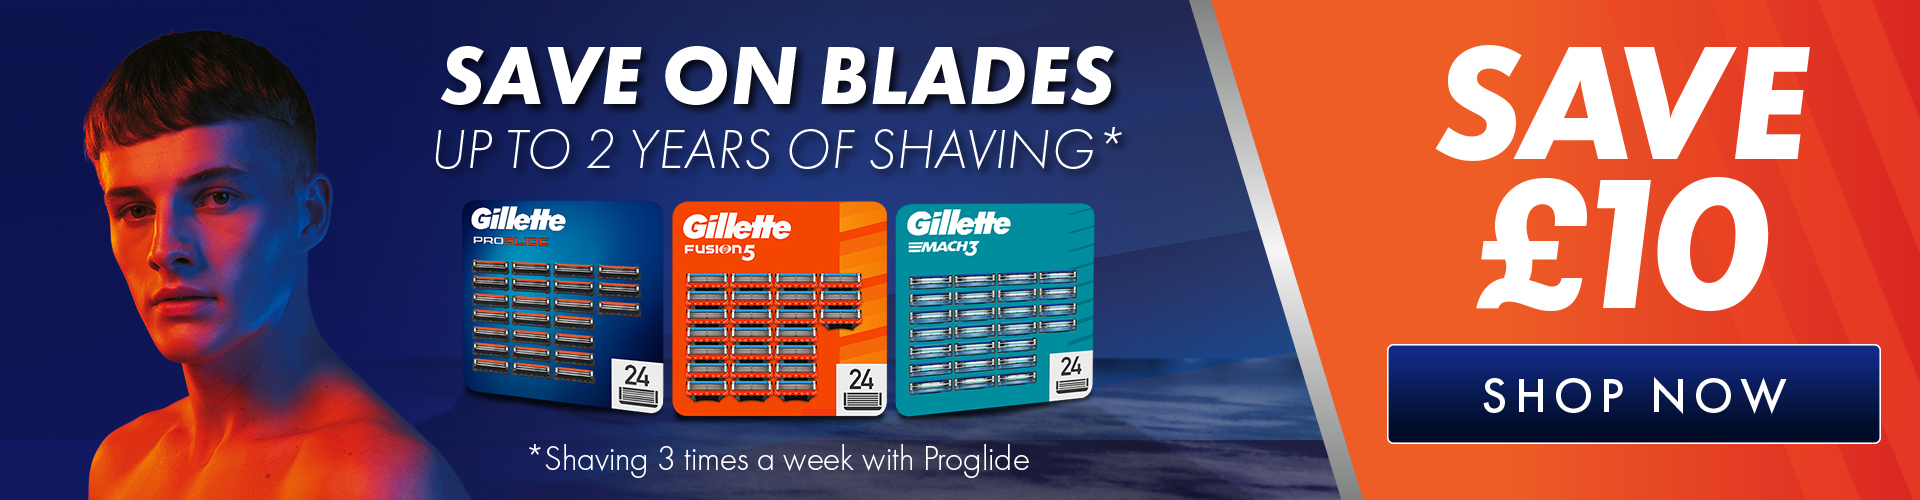 SAVE £10 ON 24-PACK BLADES